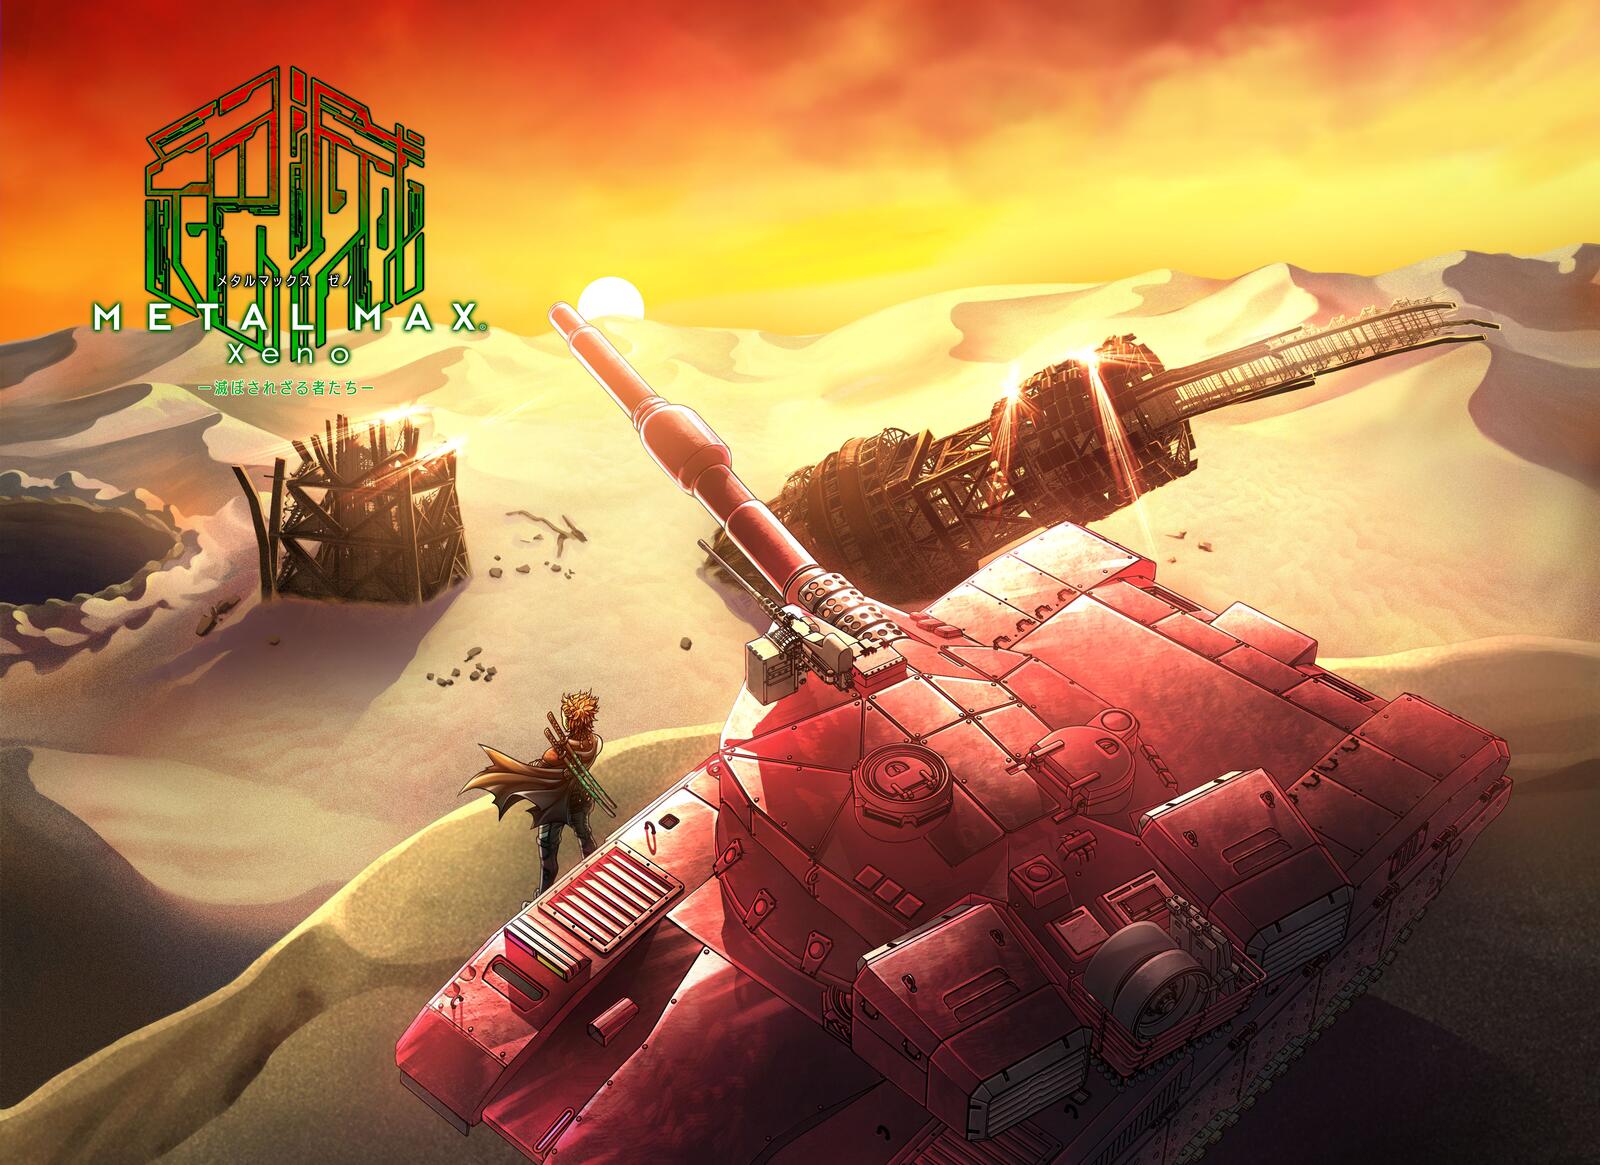 Wallpapers the 2018 Games games metal max xeno on the desktop